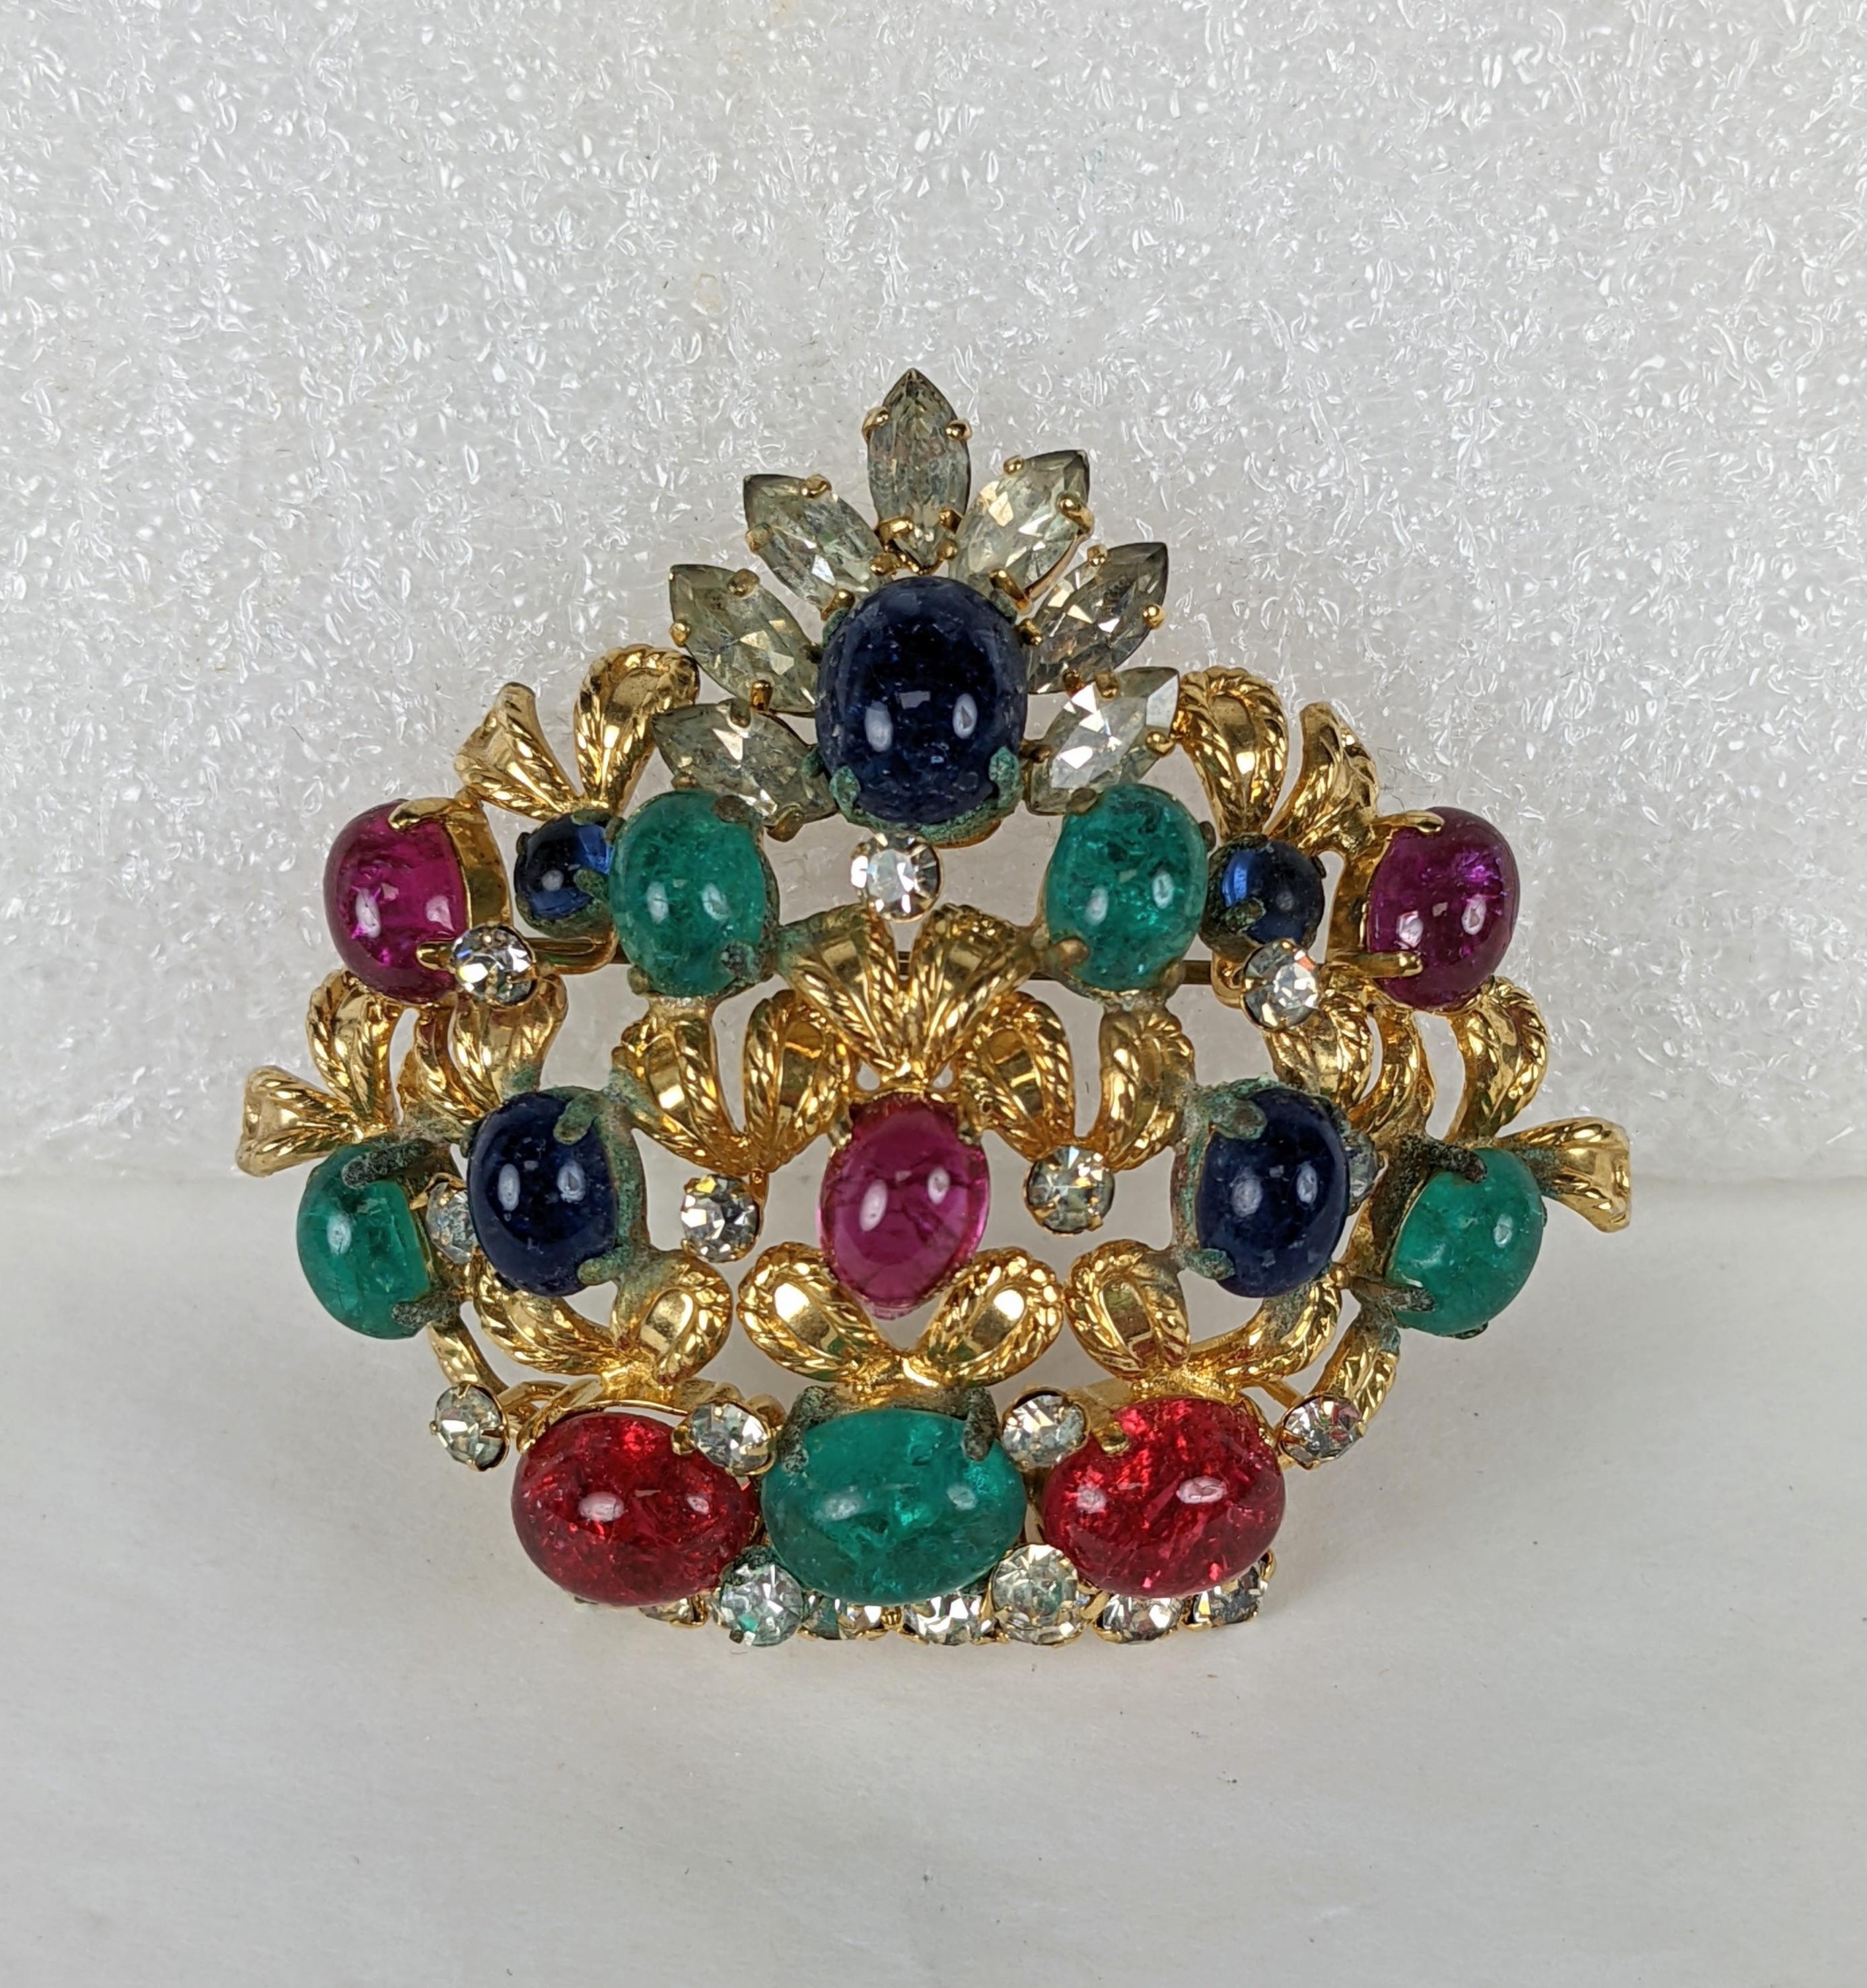 Dior Crown Dimensional Brooch from the 1960's with pate de verre cabochons of sapphire, emerald and ruby set within gilt leaves and pave accents. 
2.5